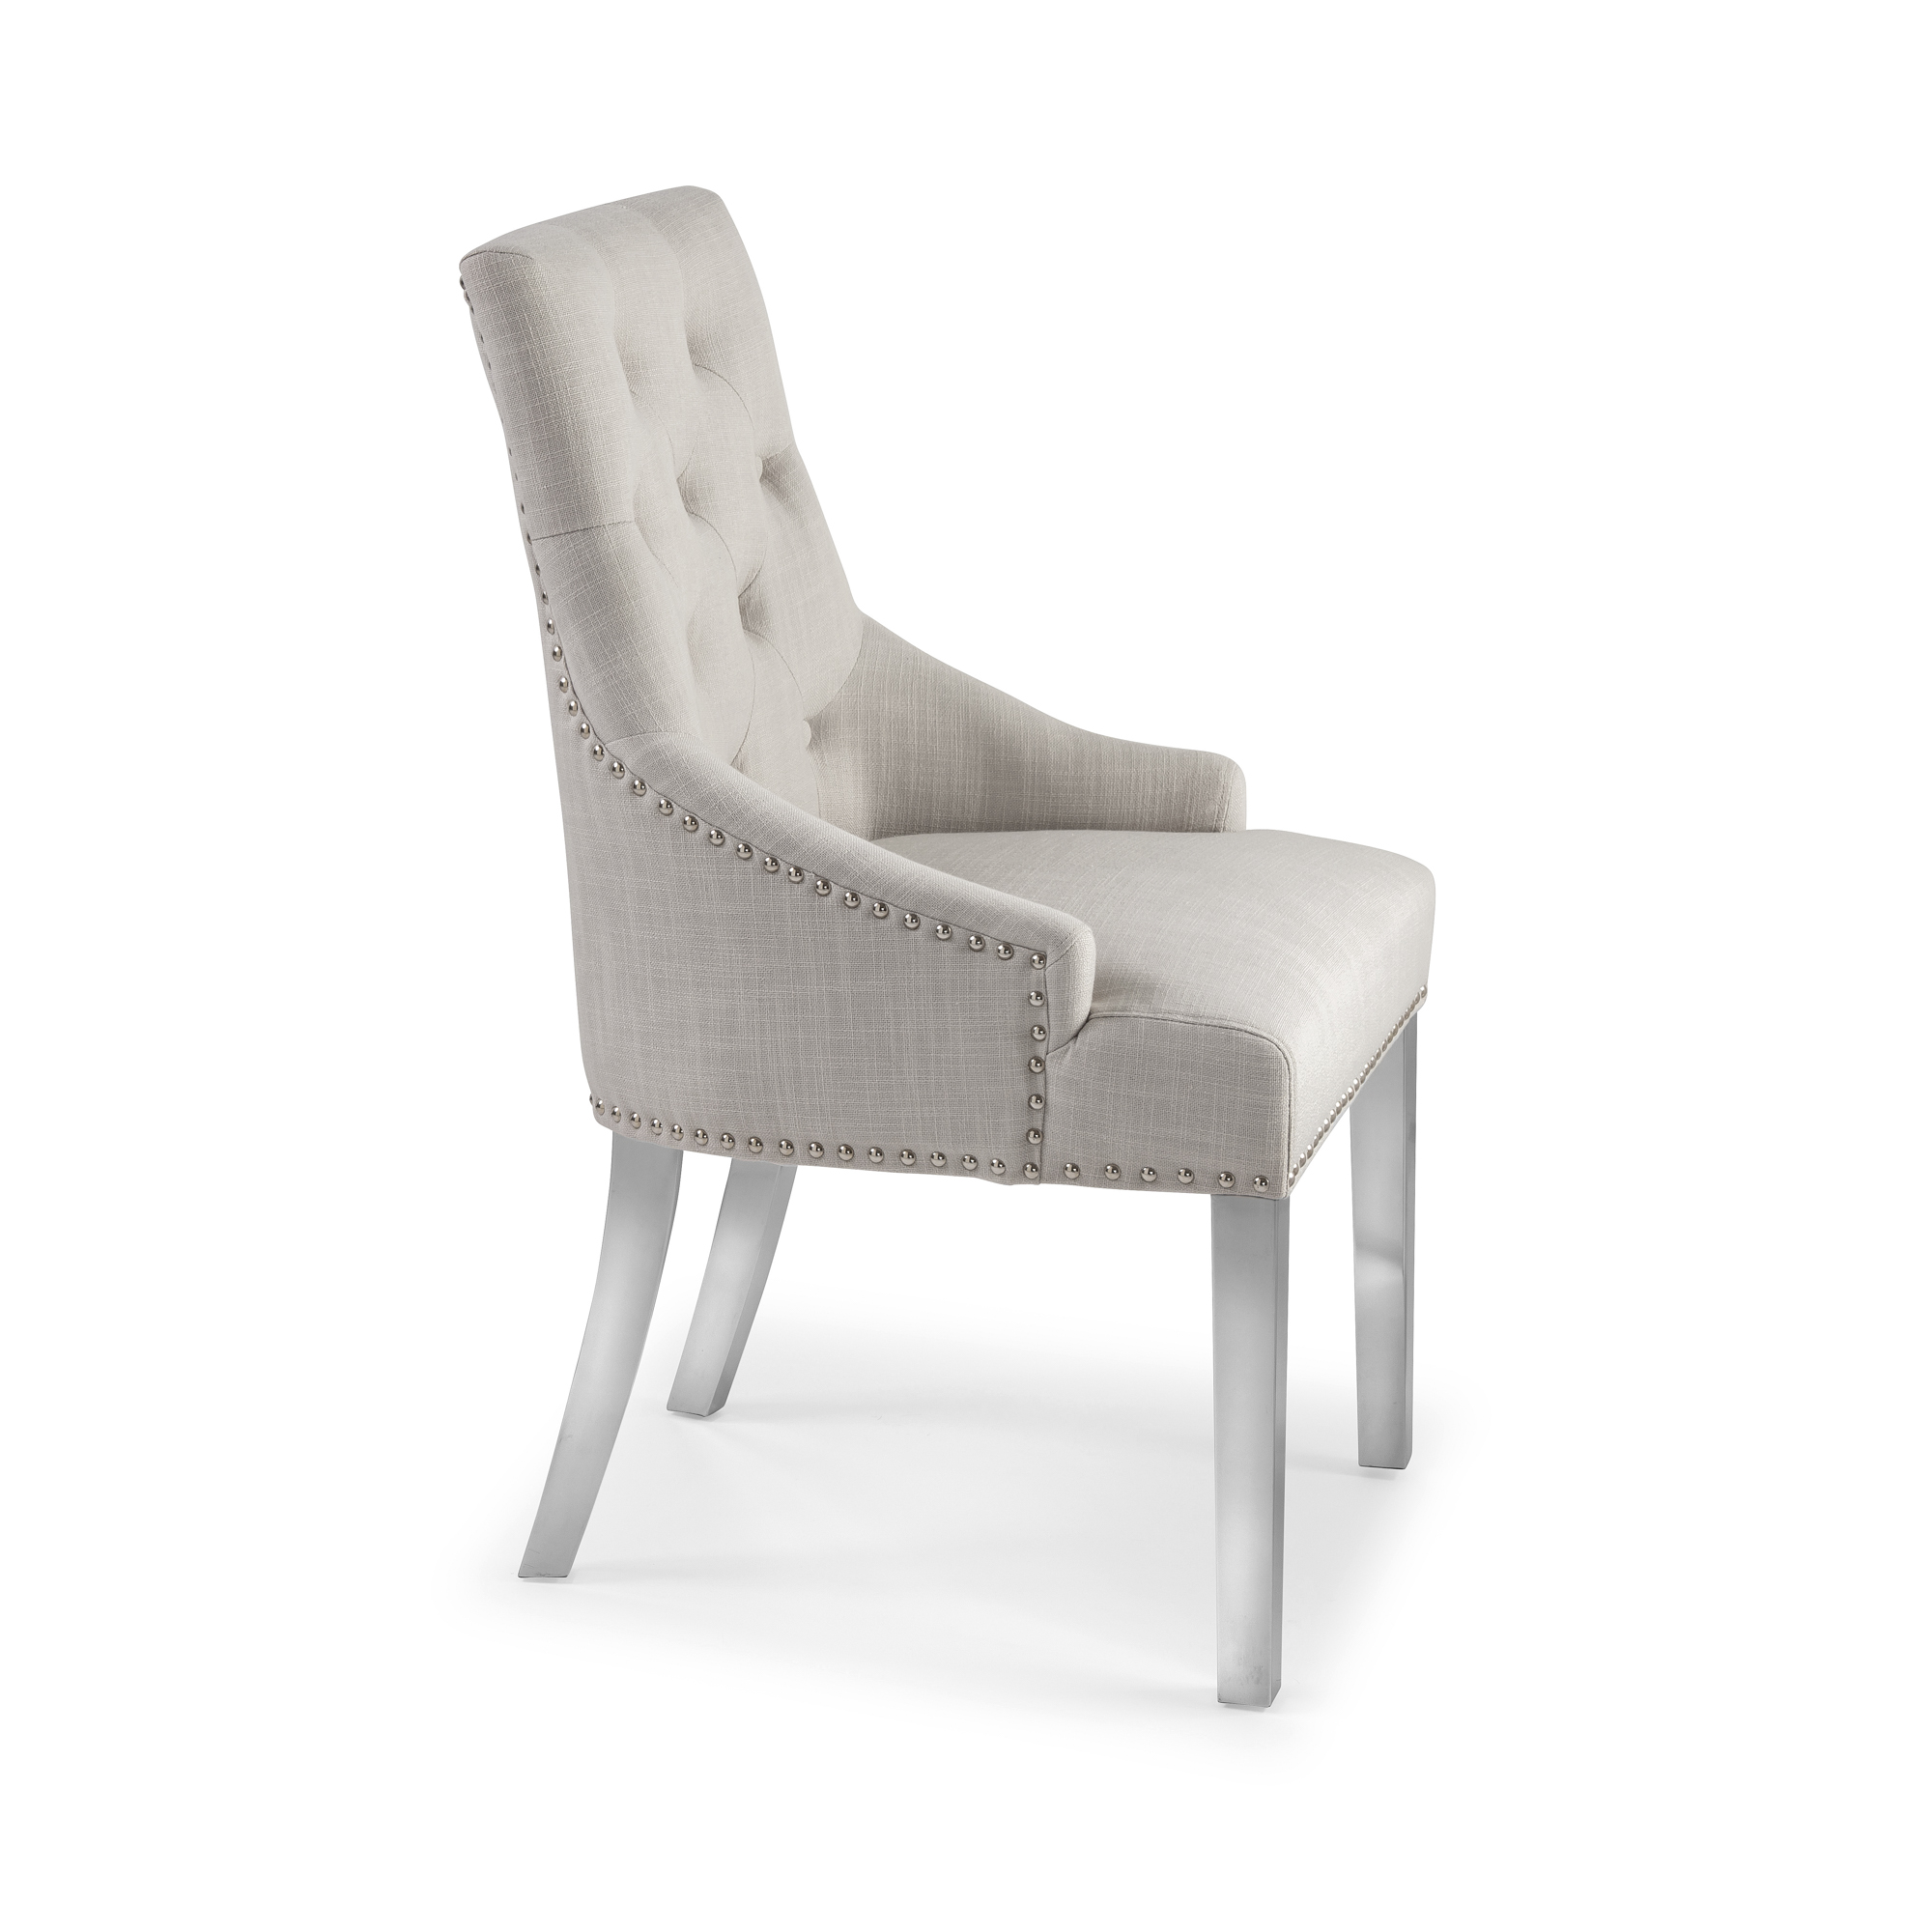 CLEARANCE: Chelsea Upholstered Scoop Dining Chair In A Natural Linen Fabric with Steel Legs